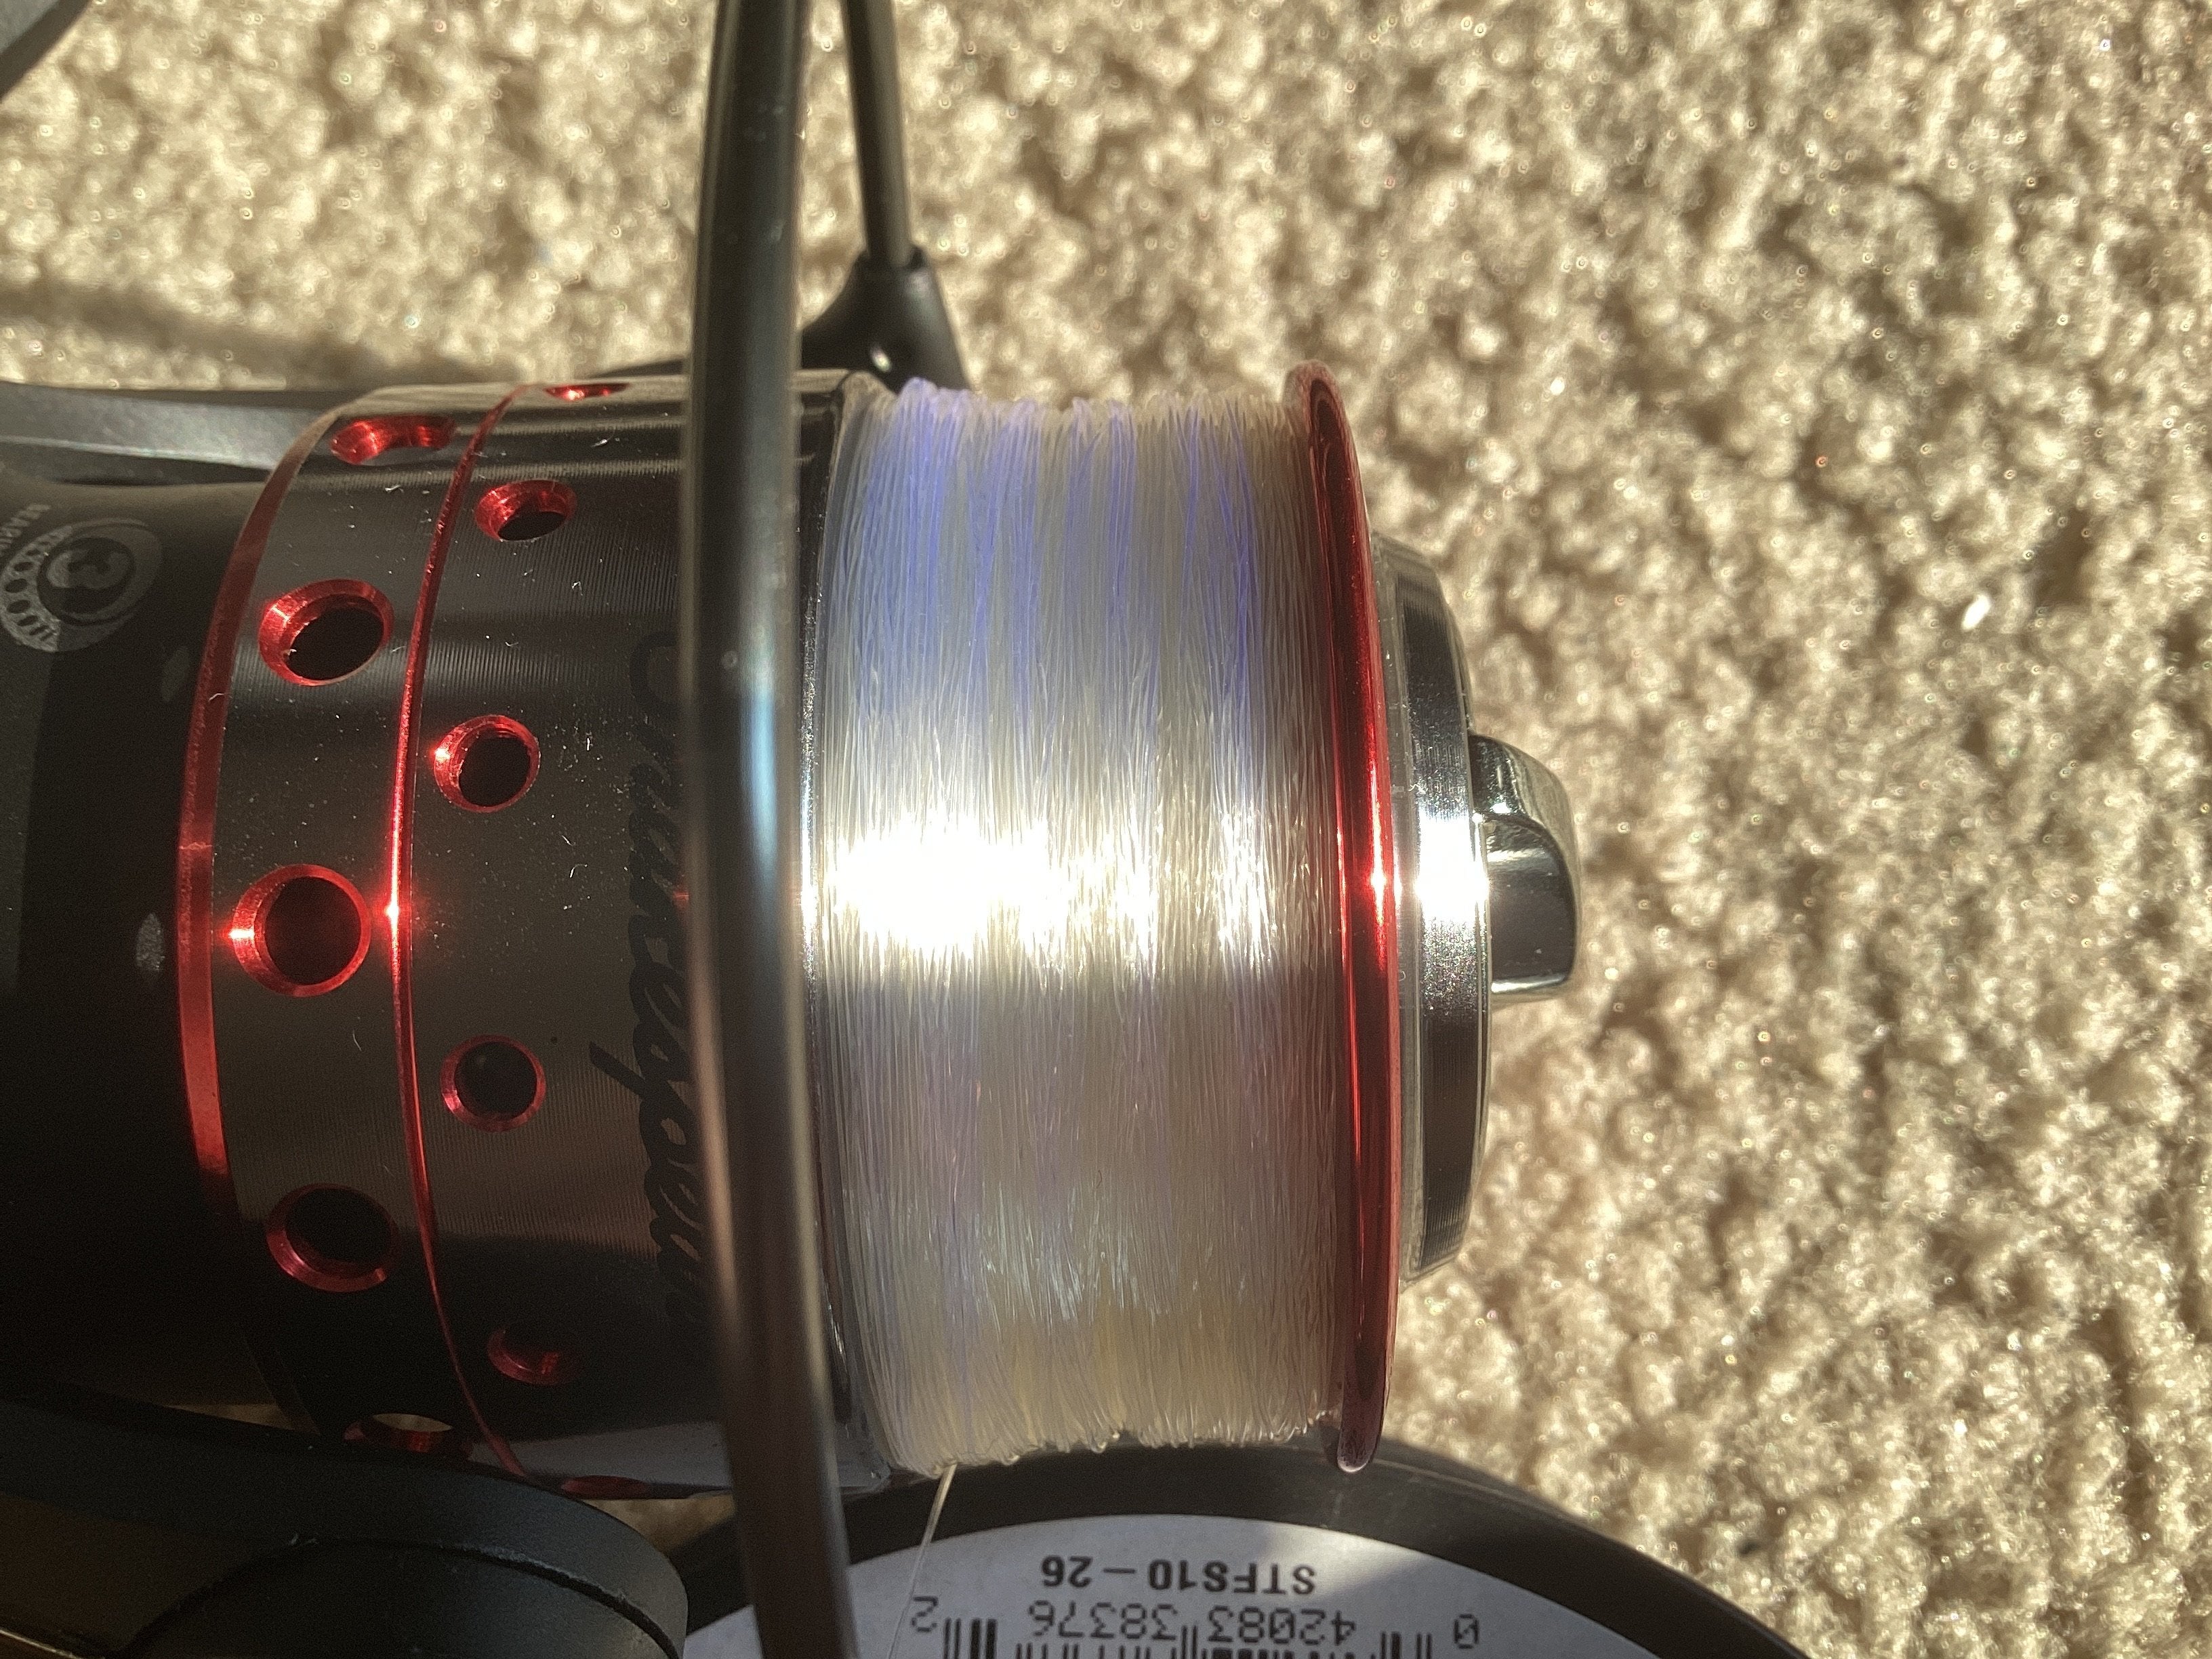 Did I over-spool my reel or did I under-spool it? Or is it just